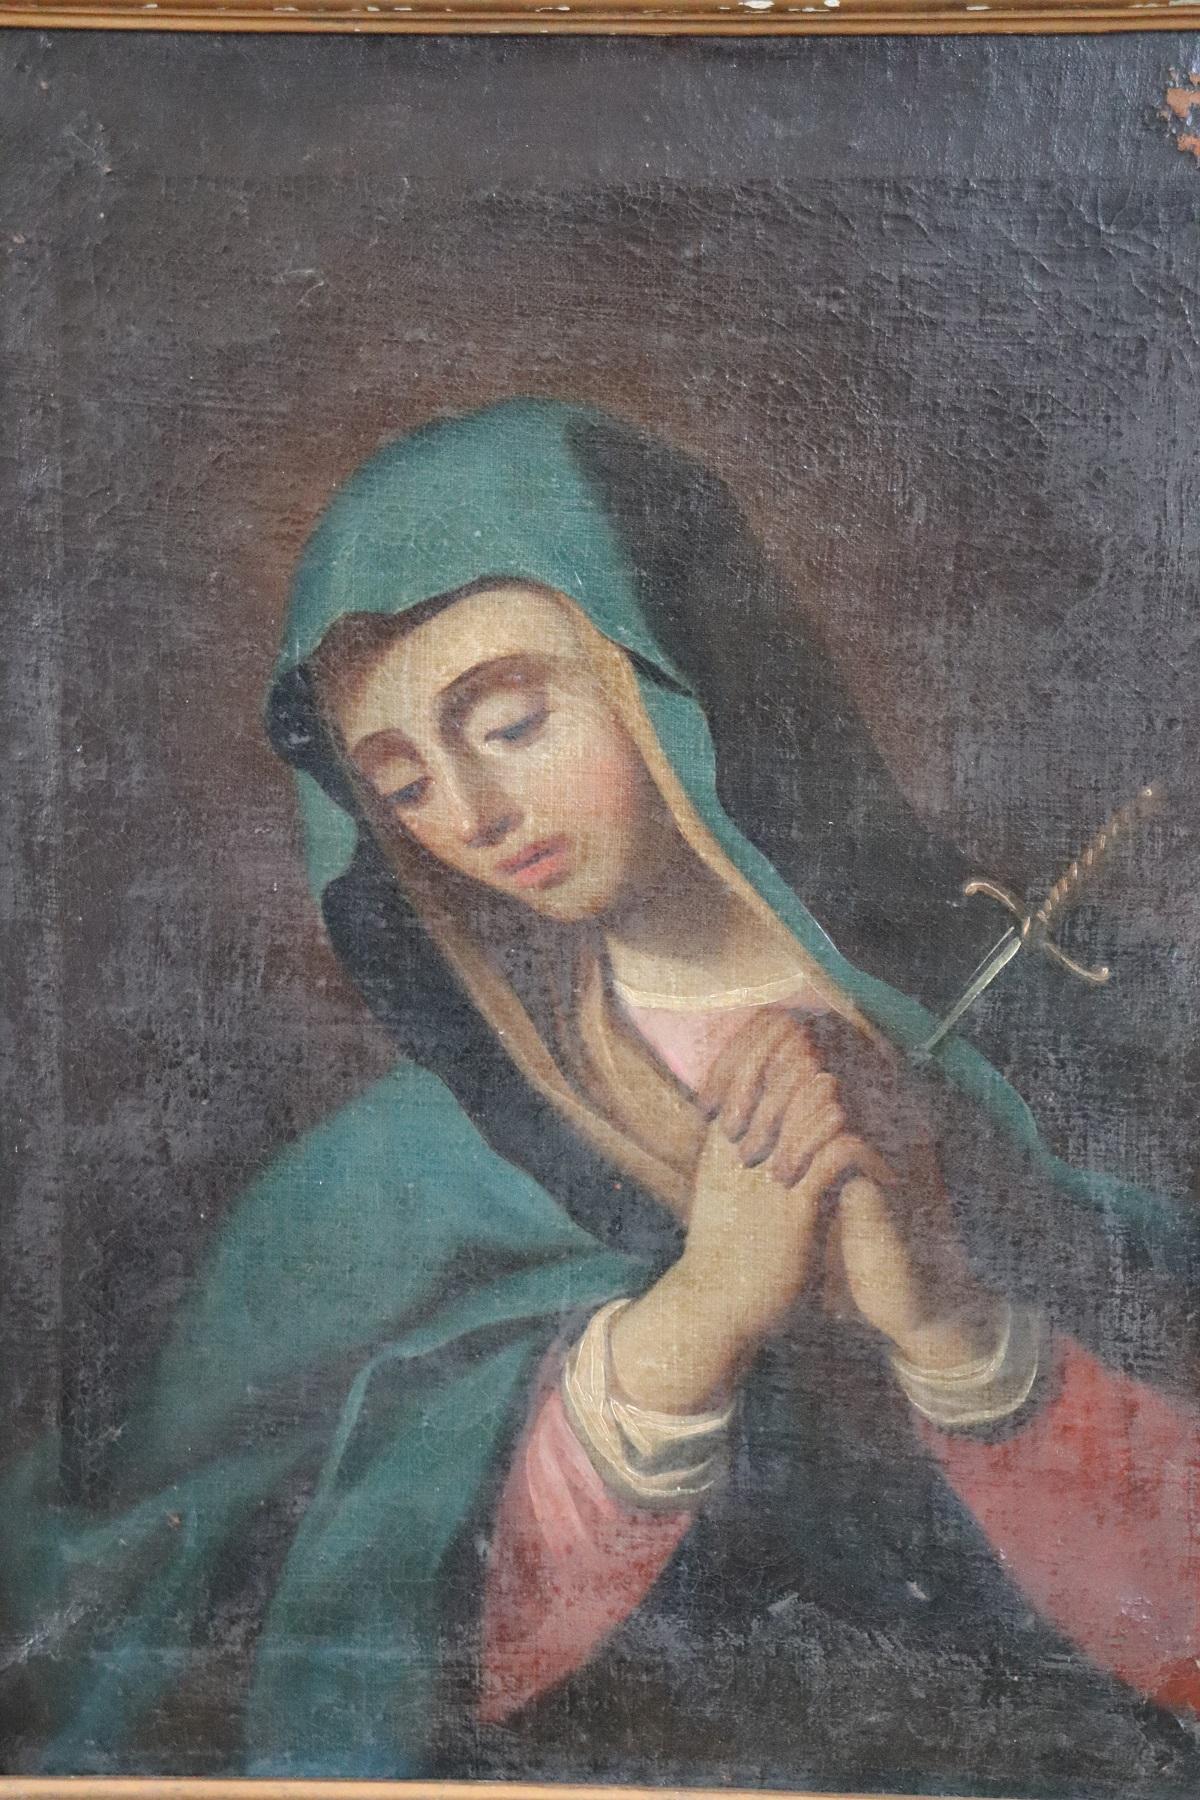 Beautiful antique Italian oil painting on canvas. Excellent pictorial quality great attention to detail. Italian school of the 18th century. Original painting and frame, never restored, see the photos on the back. Not signed. A beautiful religious